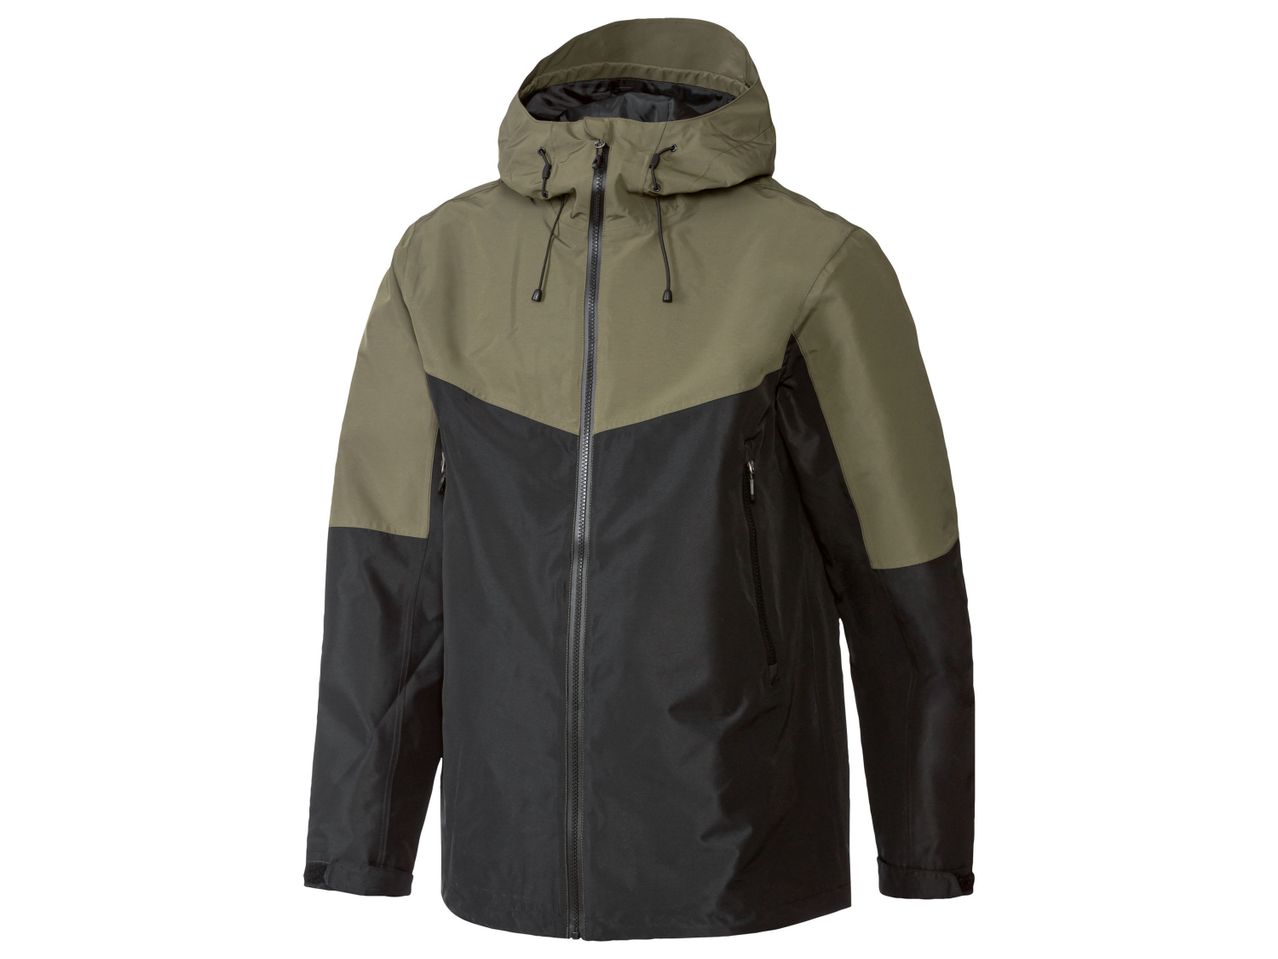 Go to full screen view: Men’s All Weather Jacket - Image 2